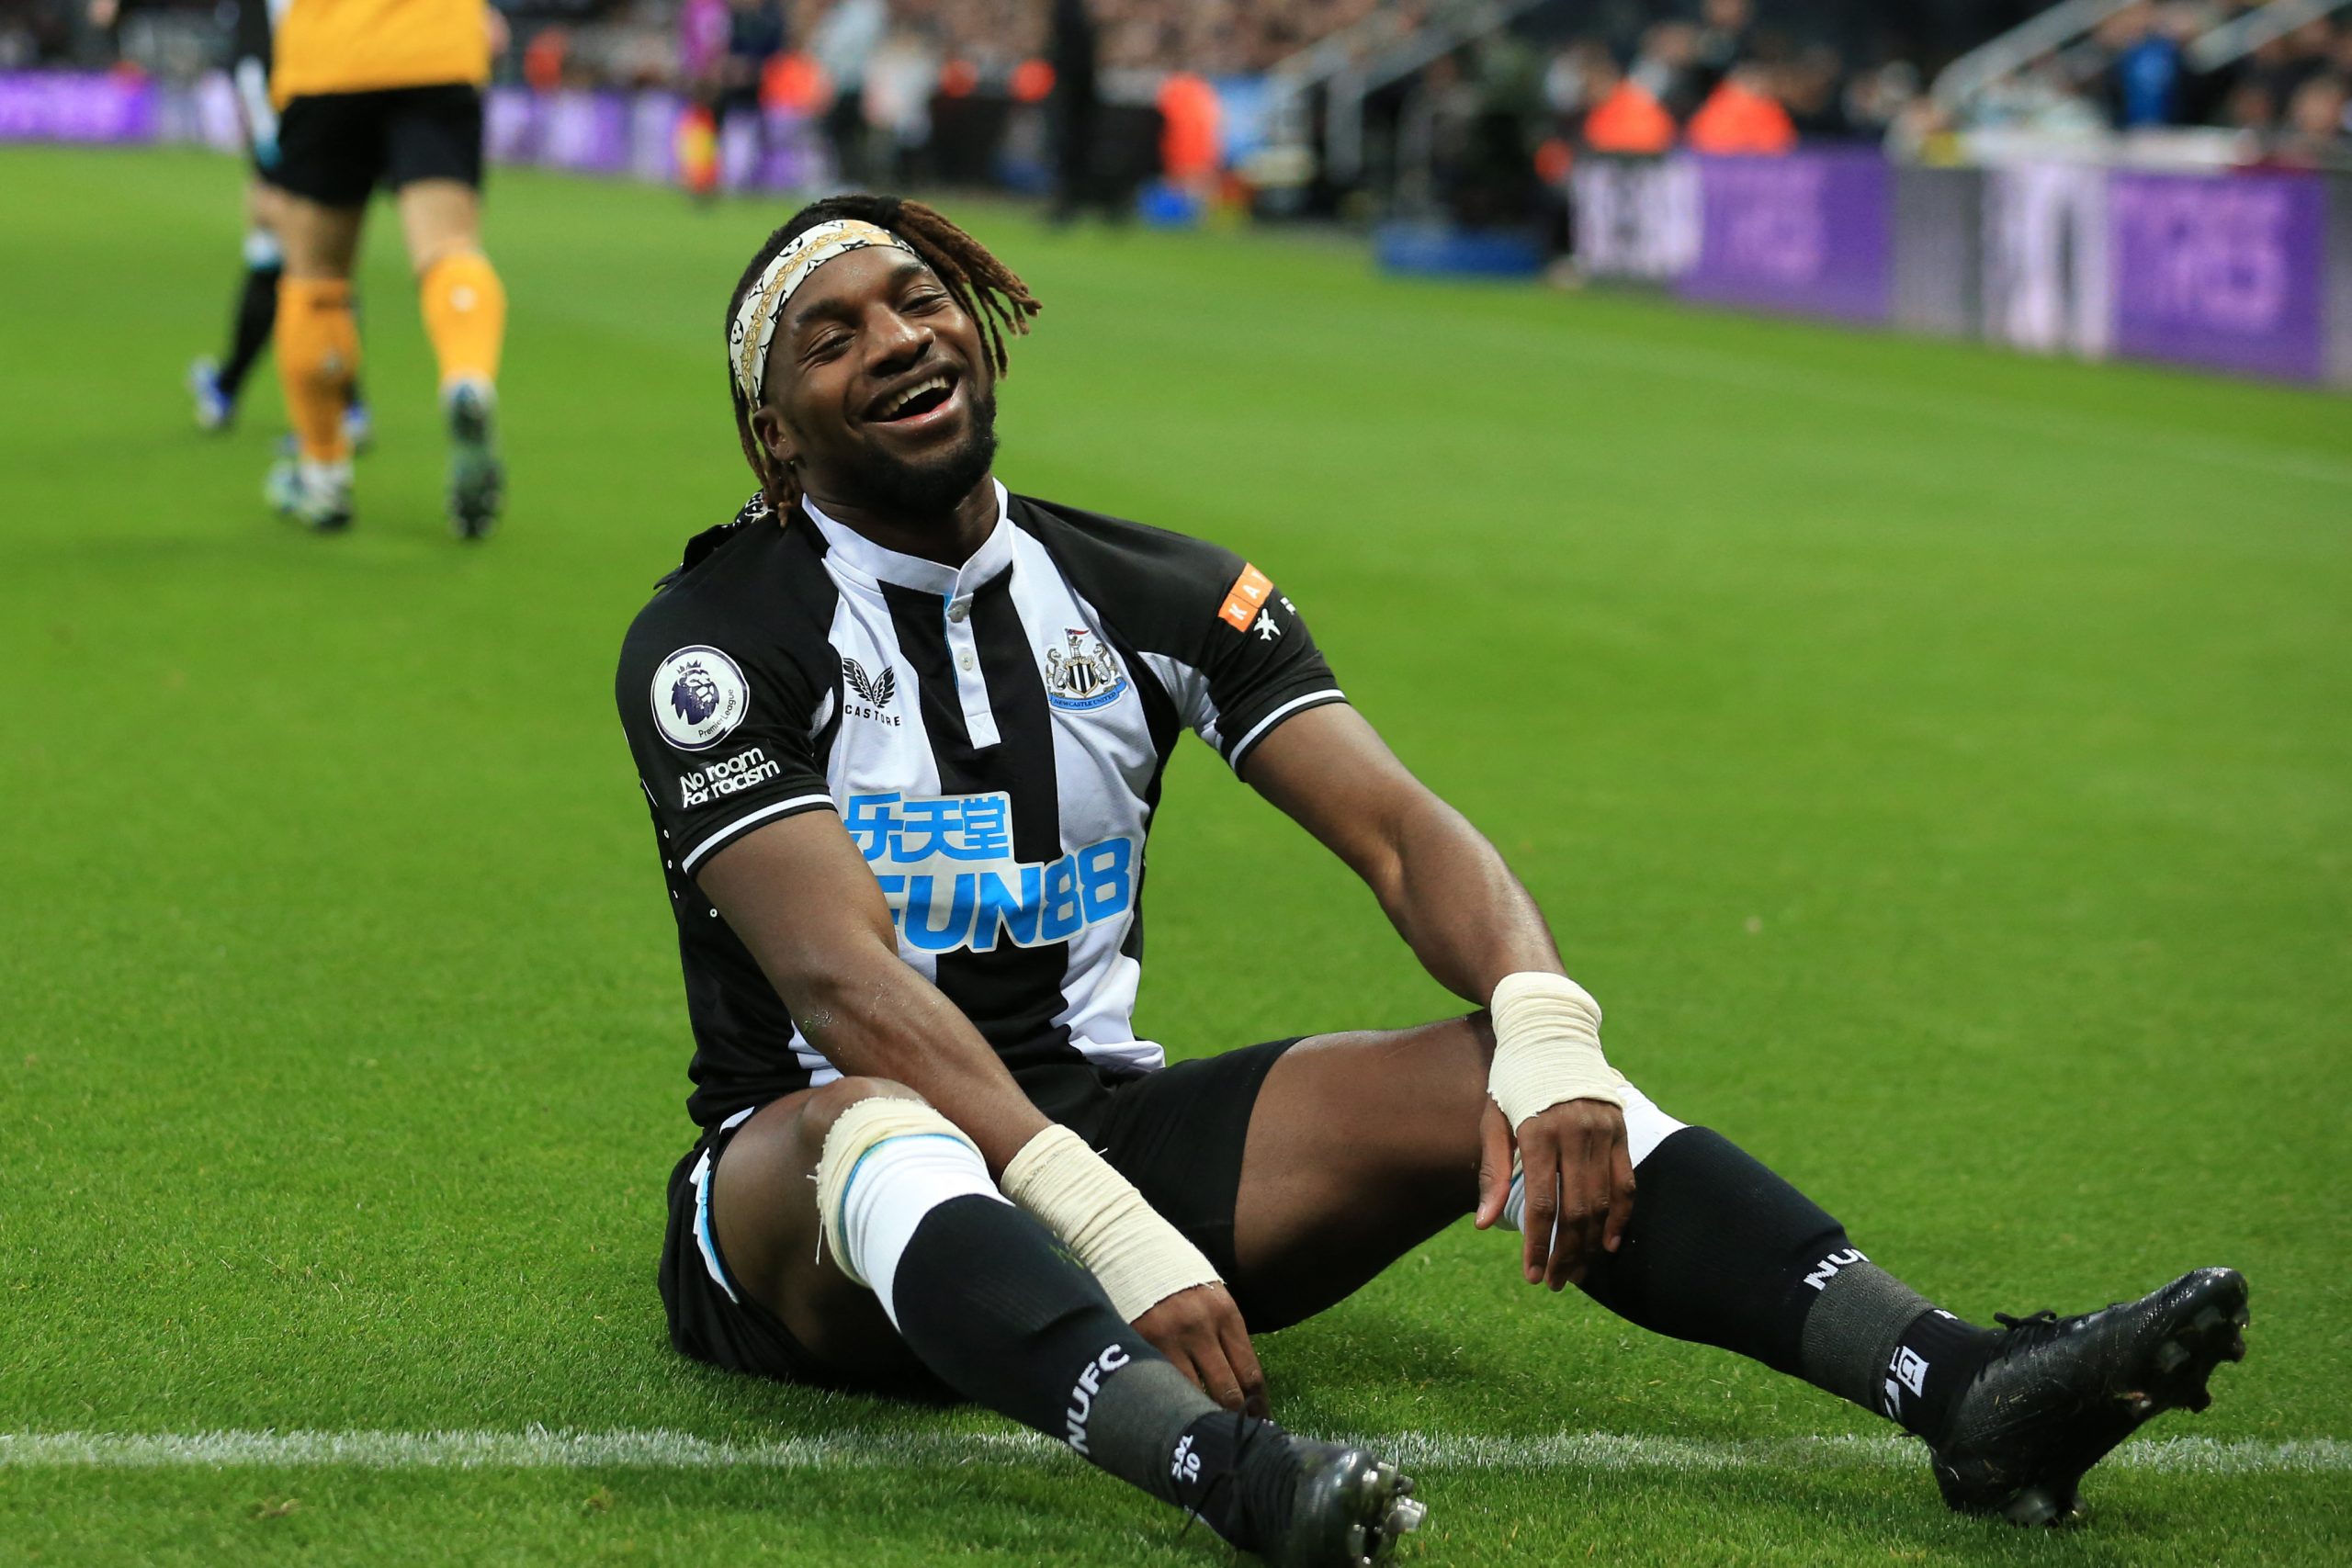 Newcastle's new owners have already answered Allan Saint-Maximin's